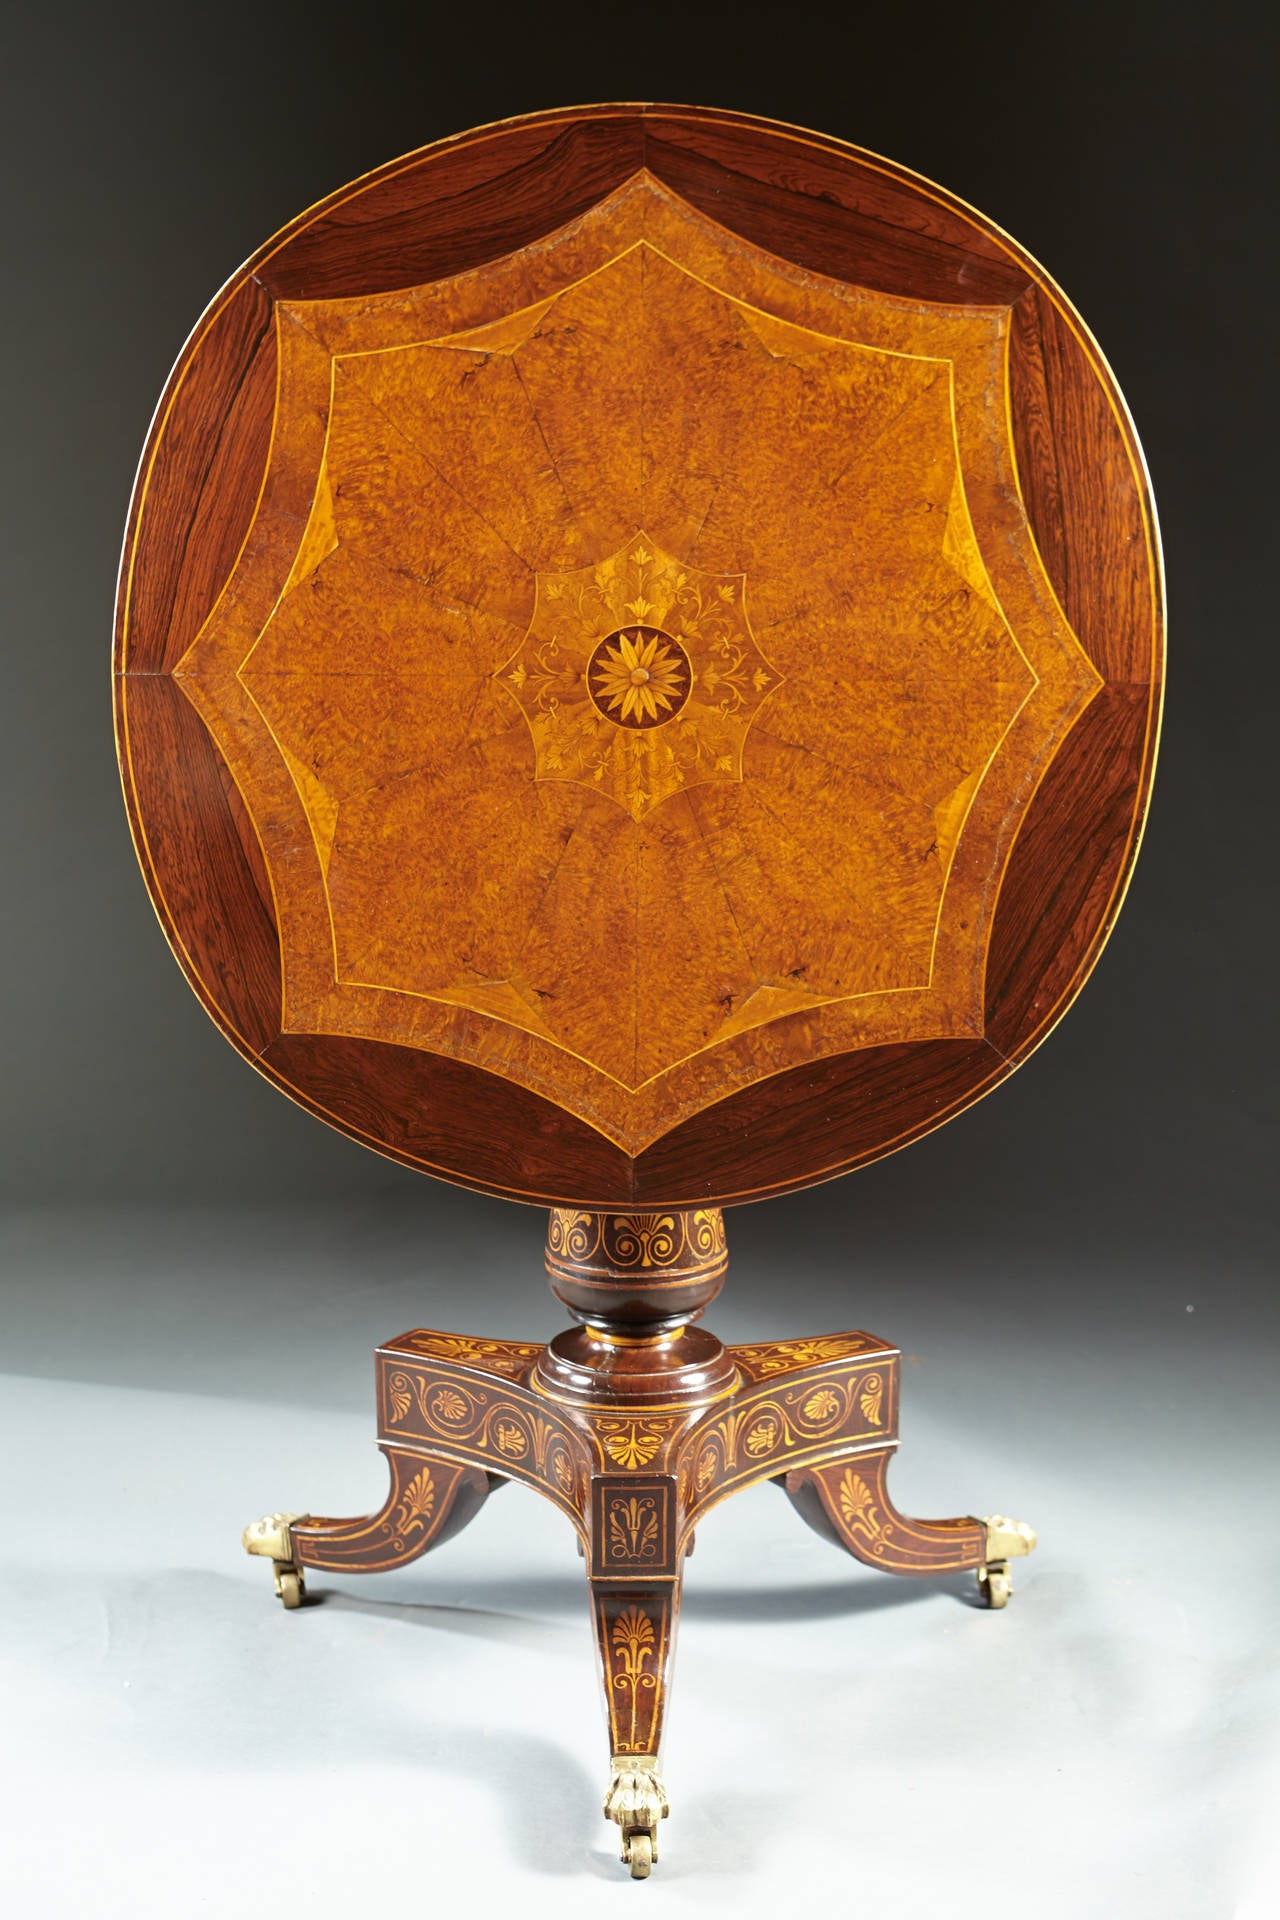 A remarkable tilt top table of 